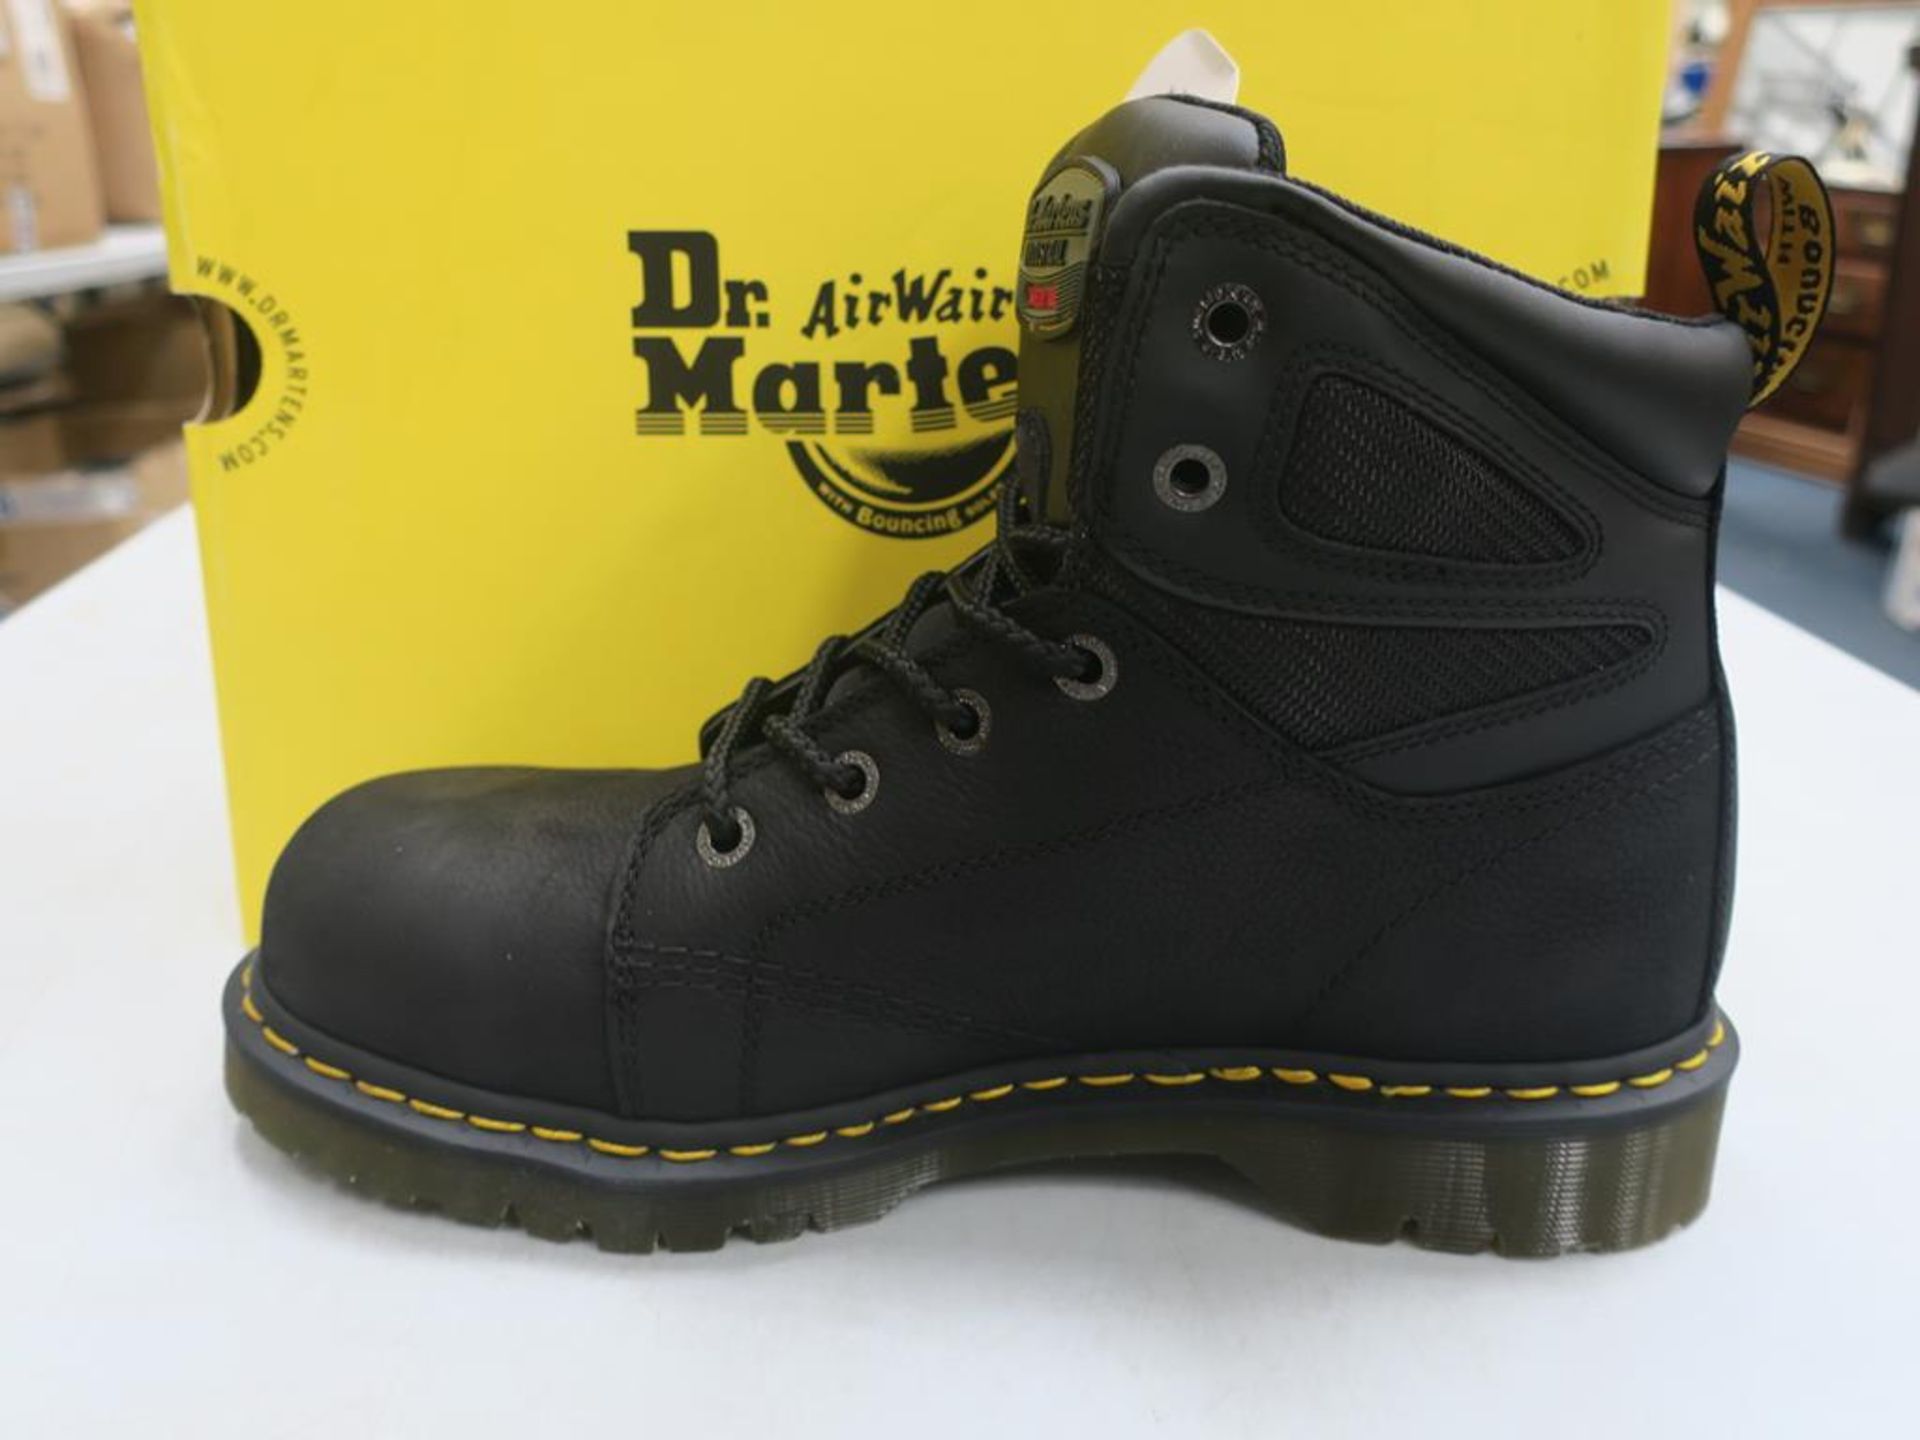 * A pair of New/Boxed Dr Martens Boots, Fairleigh St, 21046001 Overlord in black, UK size 10 - Image 2 of 3